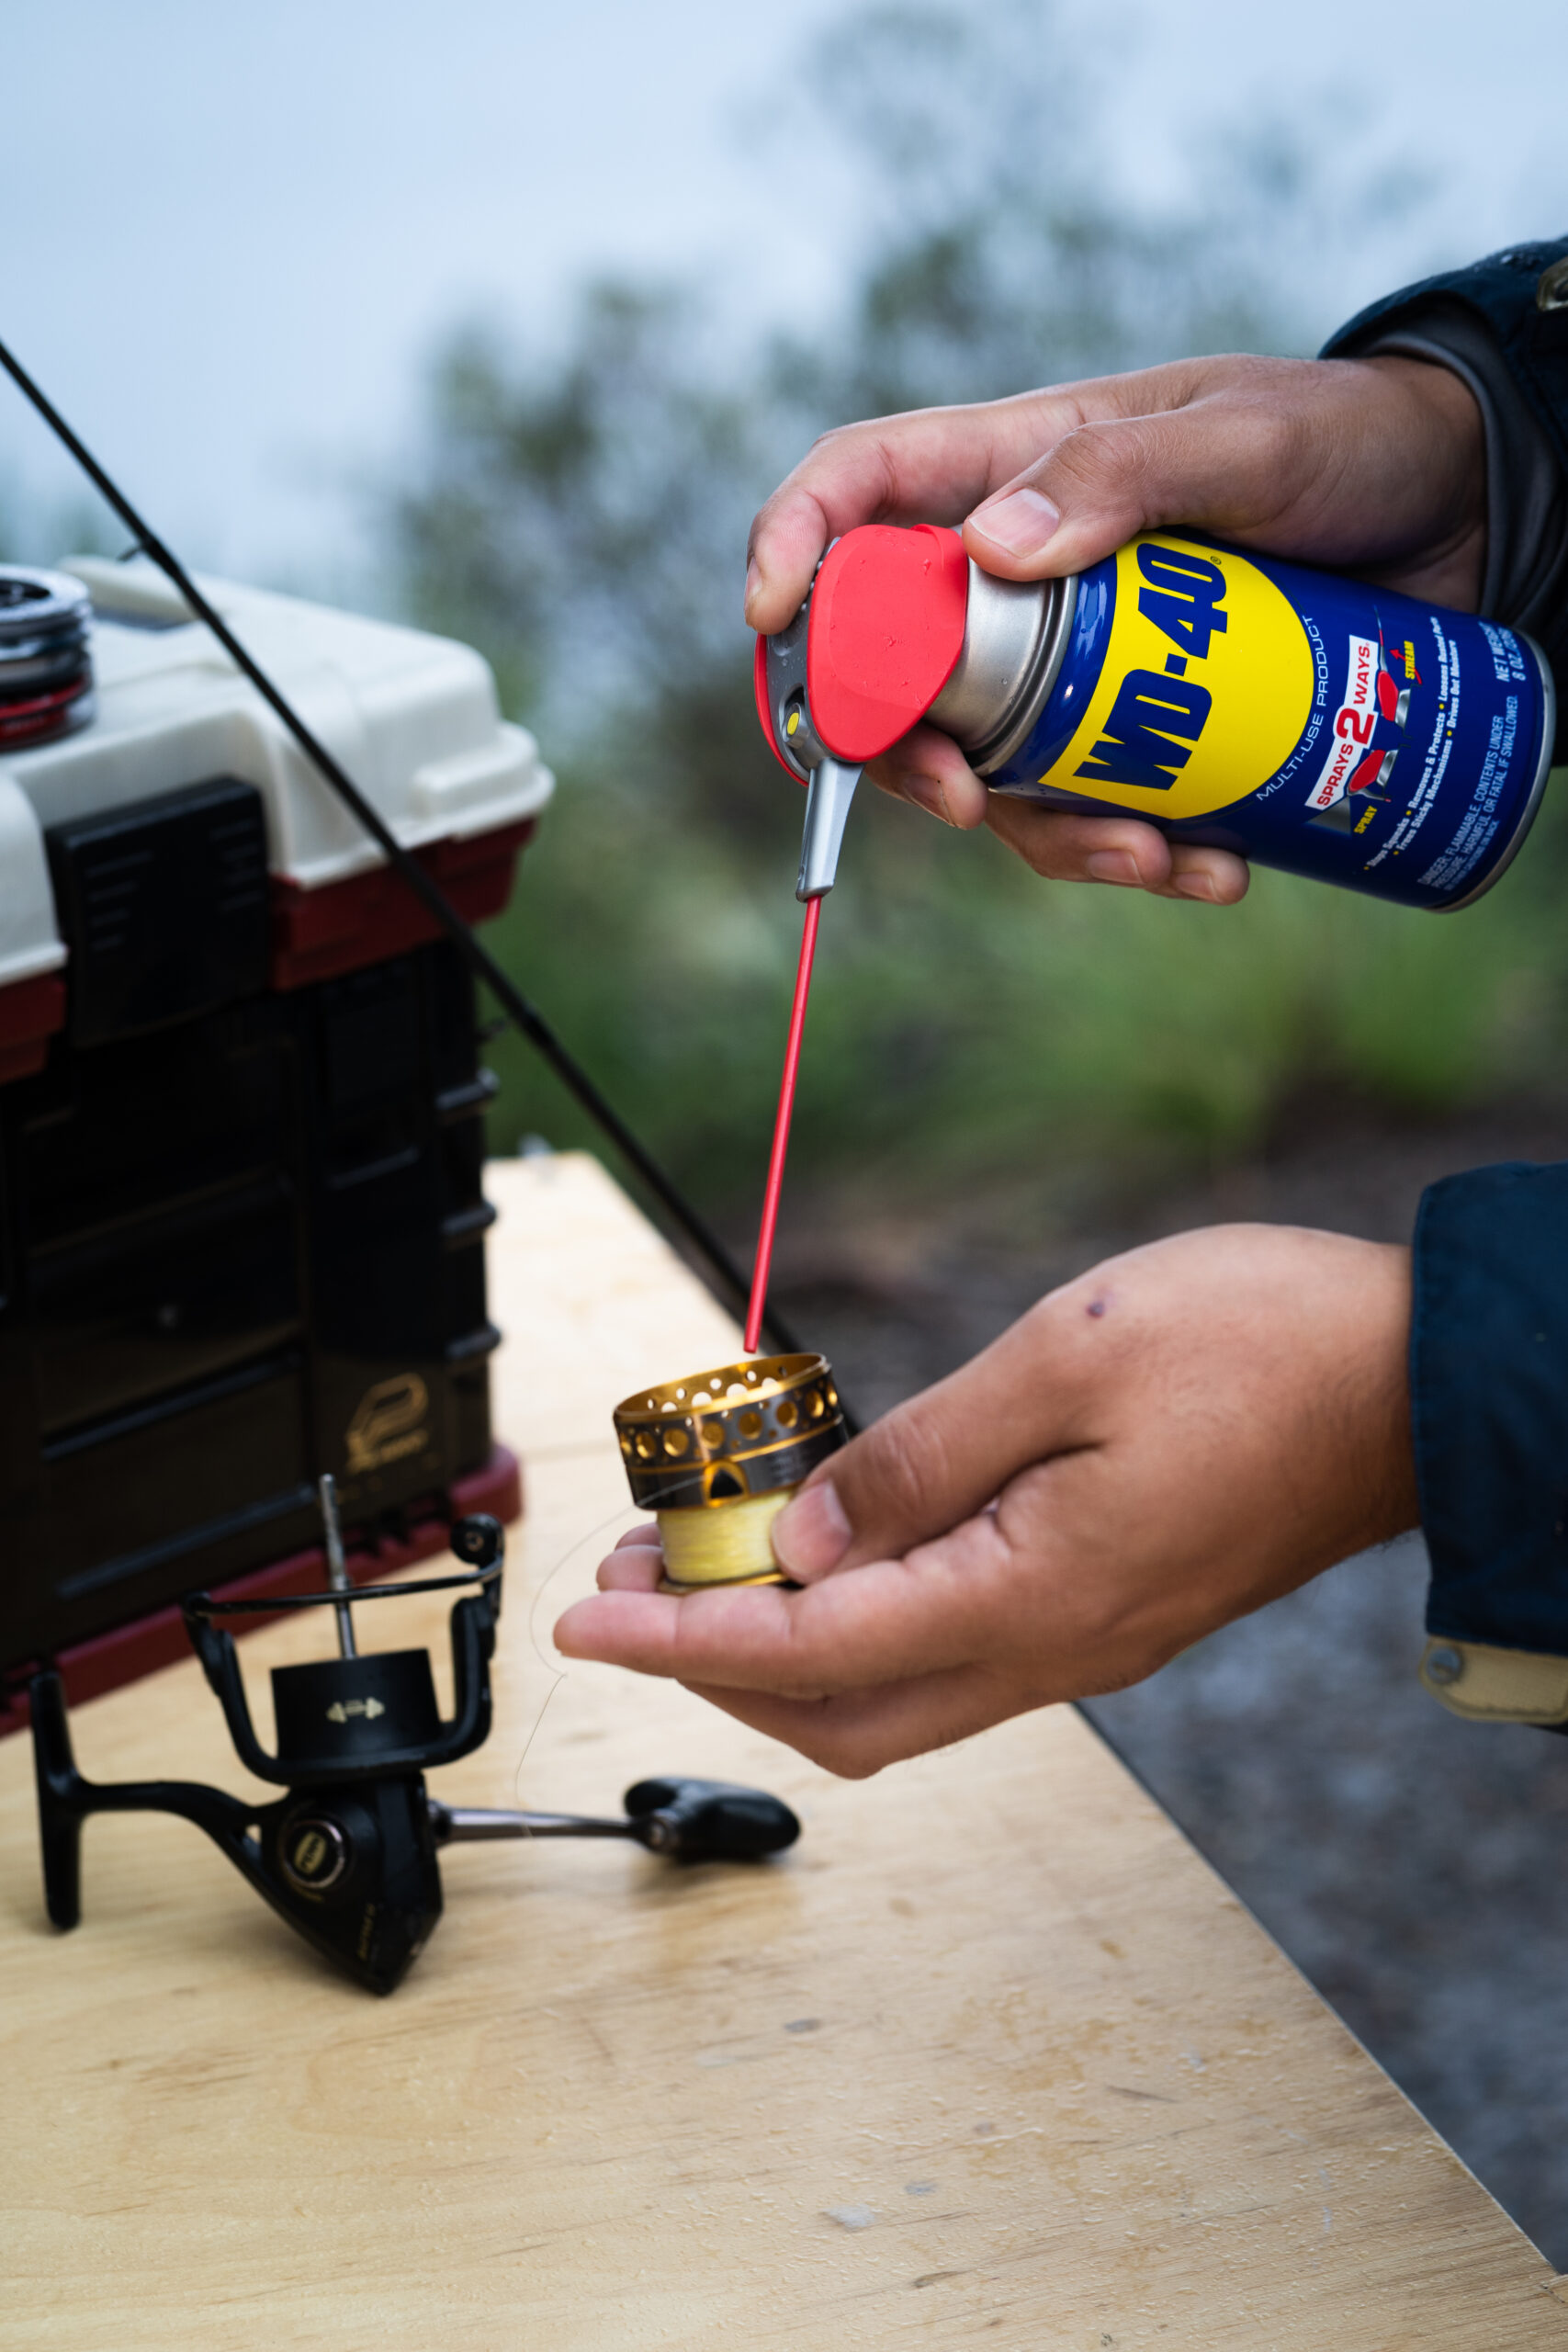 WD-40 Specialist® Electric Parts Cleaner